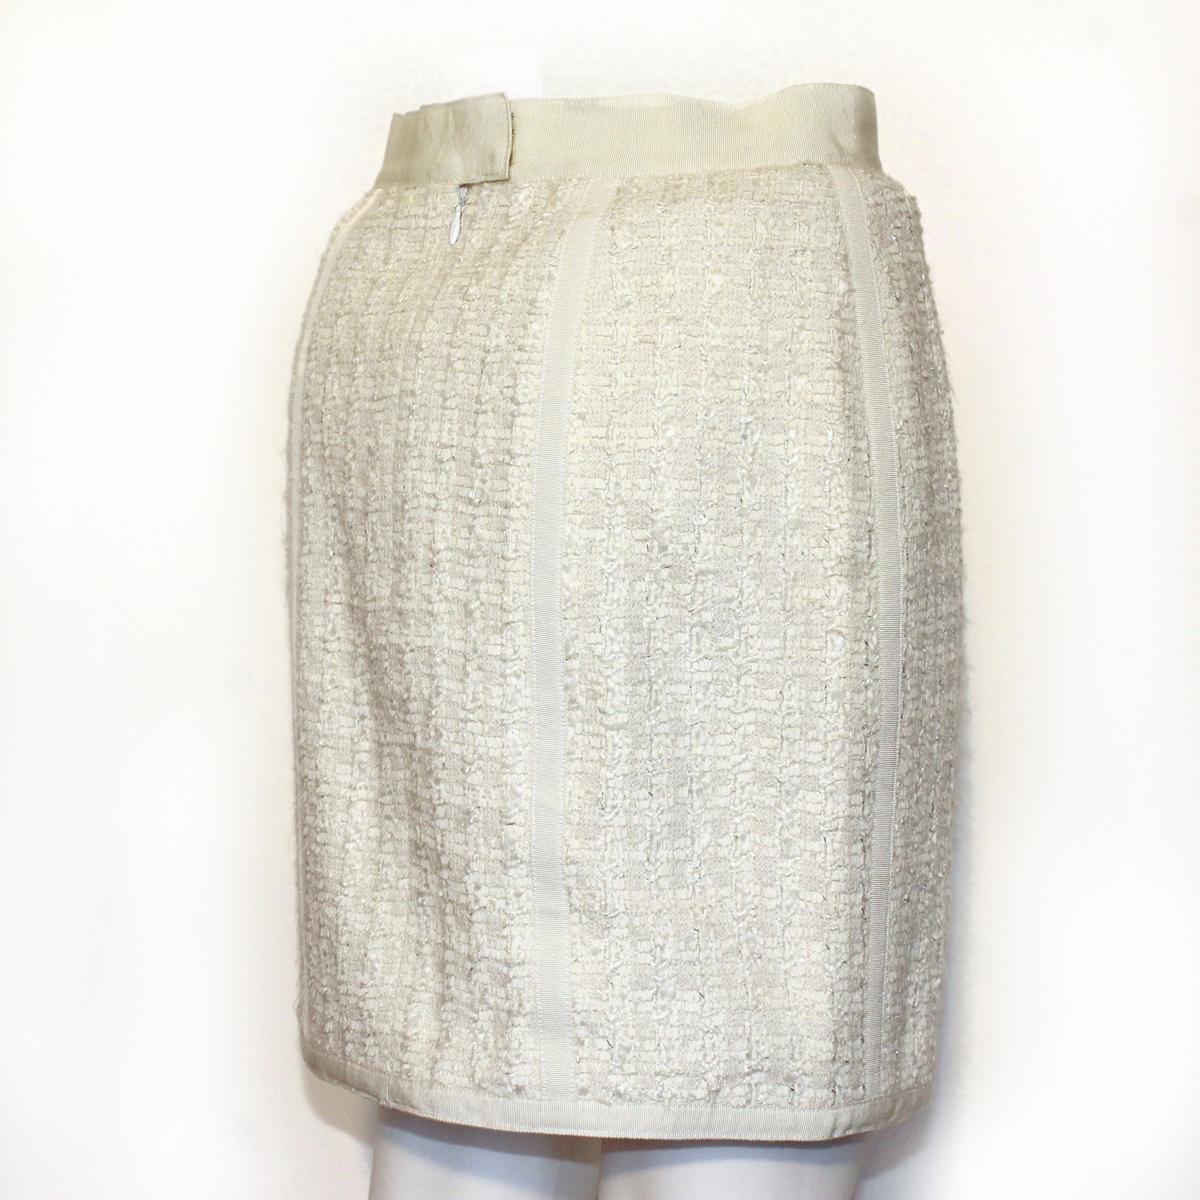 Iconic Chanel skirt
Mixed textile
Silk lining
White cream color
No pockets
Total length cm 46 (18.1 inches)
Worldwide express shipping included in the price !